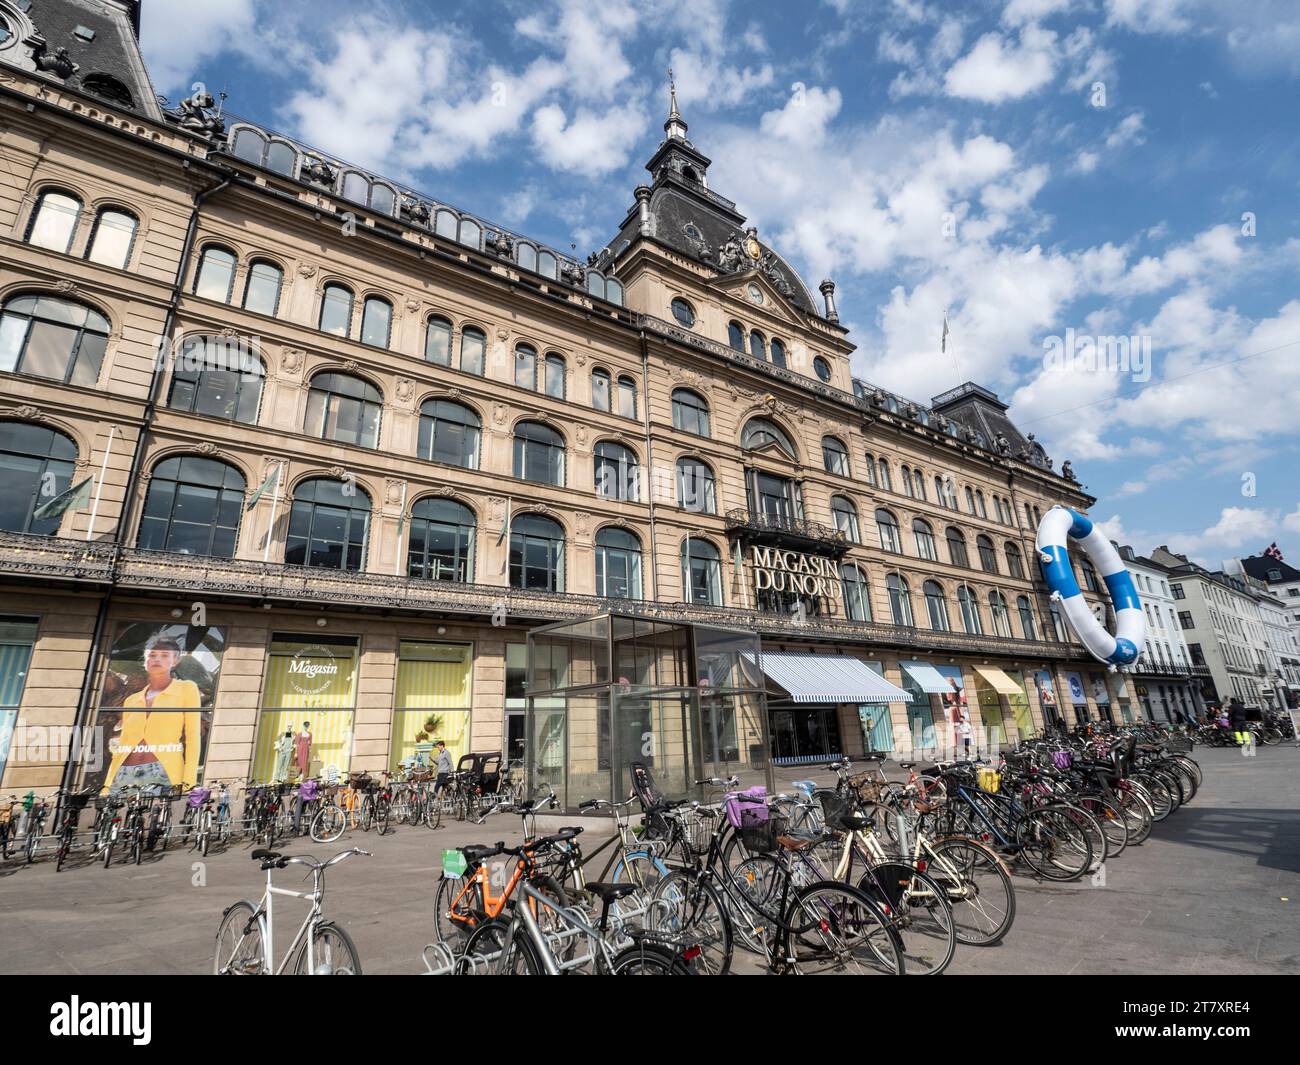 Bicycles parked in front of the Magasin du Nord department store, Copenhagen, Denmark, Scandinavia, Europe Stock Photo